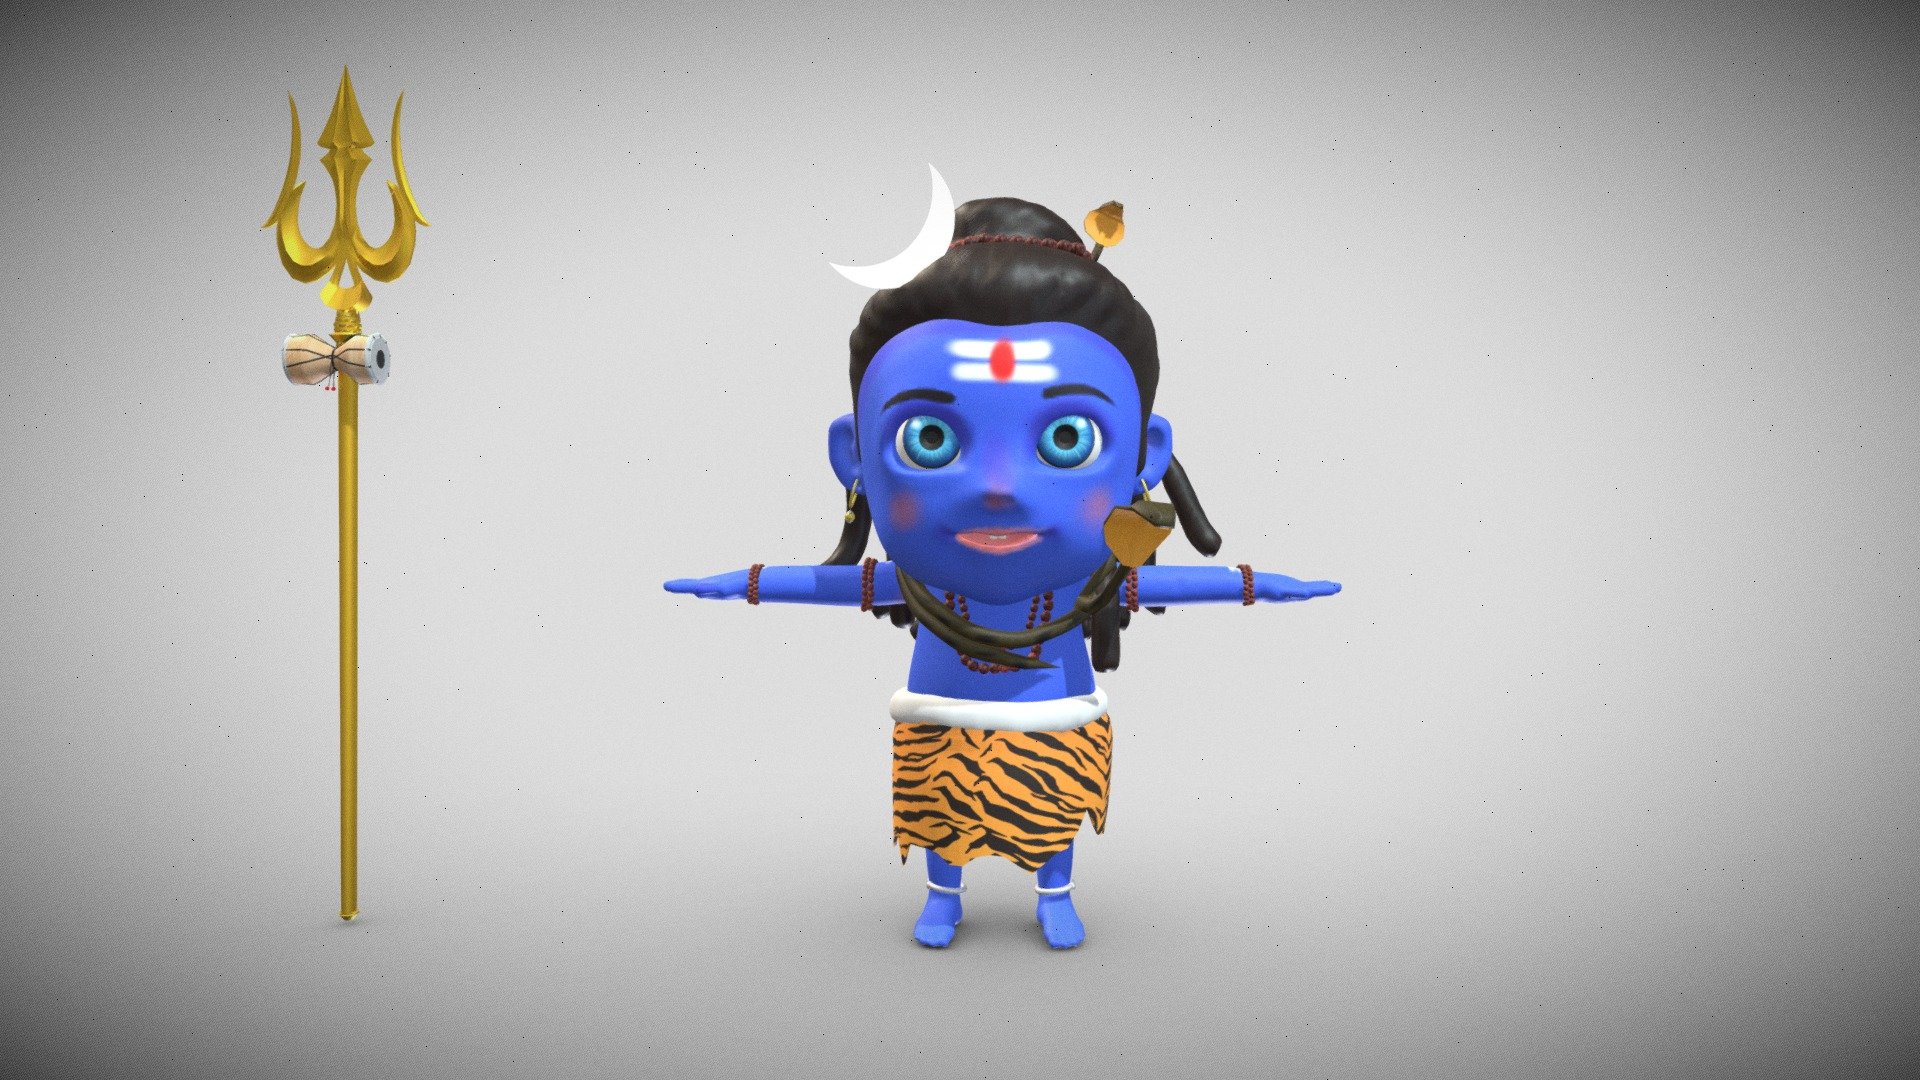 I made this shiva idol on occasion of sawan month #2nd monday 
baby shiva . i don't use any ref. for that just imagine a cute face shiva and made in z brush , autodesk maya 
hope u all like it .... 3d model